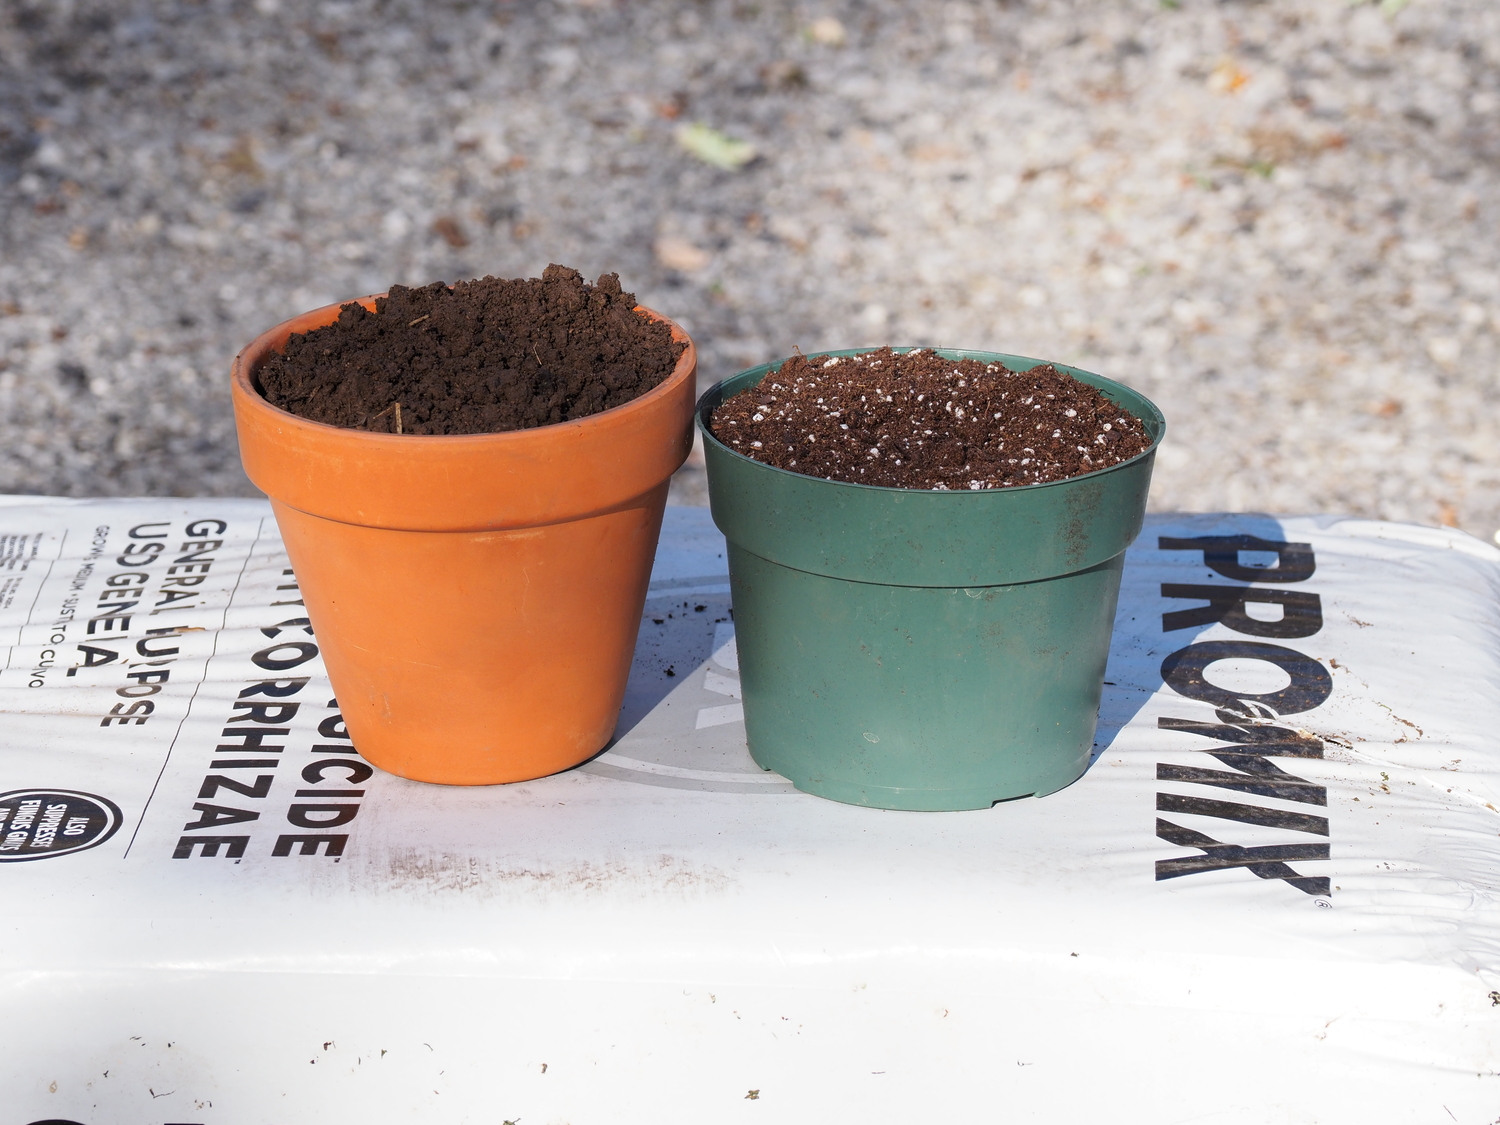 The fragile 6-inch clay pot on the left can cost $4, and while there are good reasons to use them they are difficult to ship. The clay pot and garden soil weigh 4.16 pounds. The plastic pot of the same volume to the right and filled with a peat-lite potting mix weighs only 10.5 ounces. That’s about 600 percent less than the clay pot with soil. Do plants know the difference?  ANDREW MESSINGER